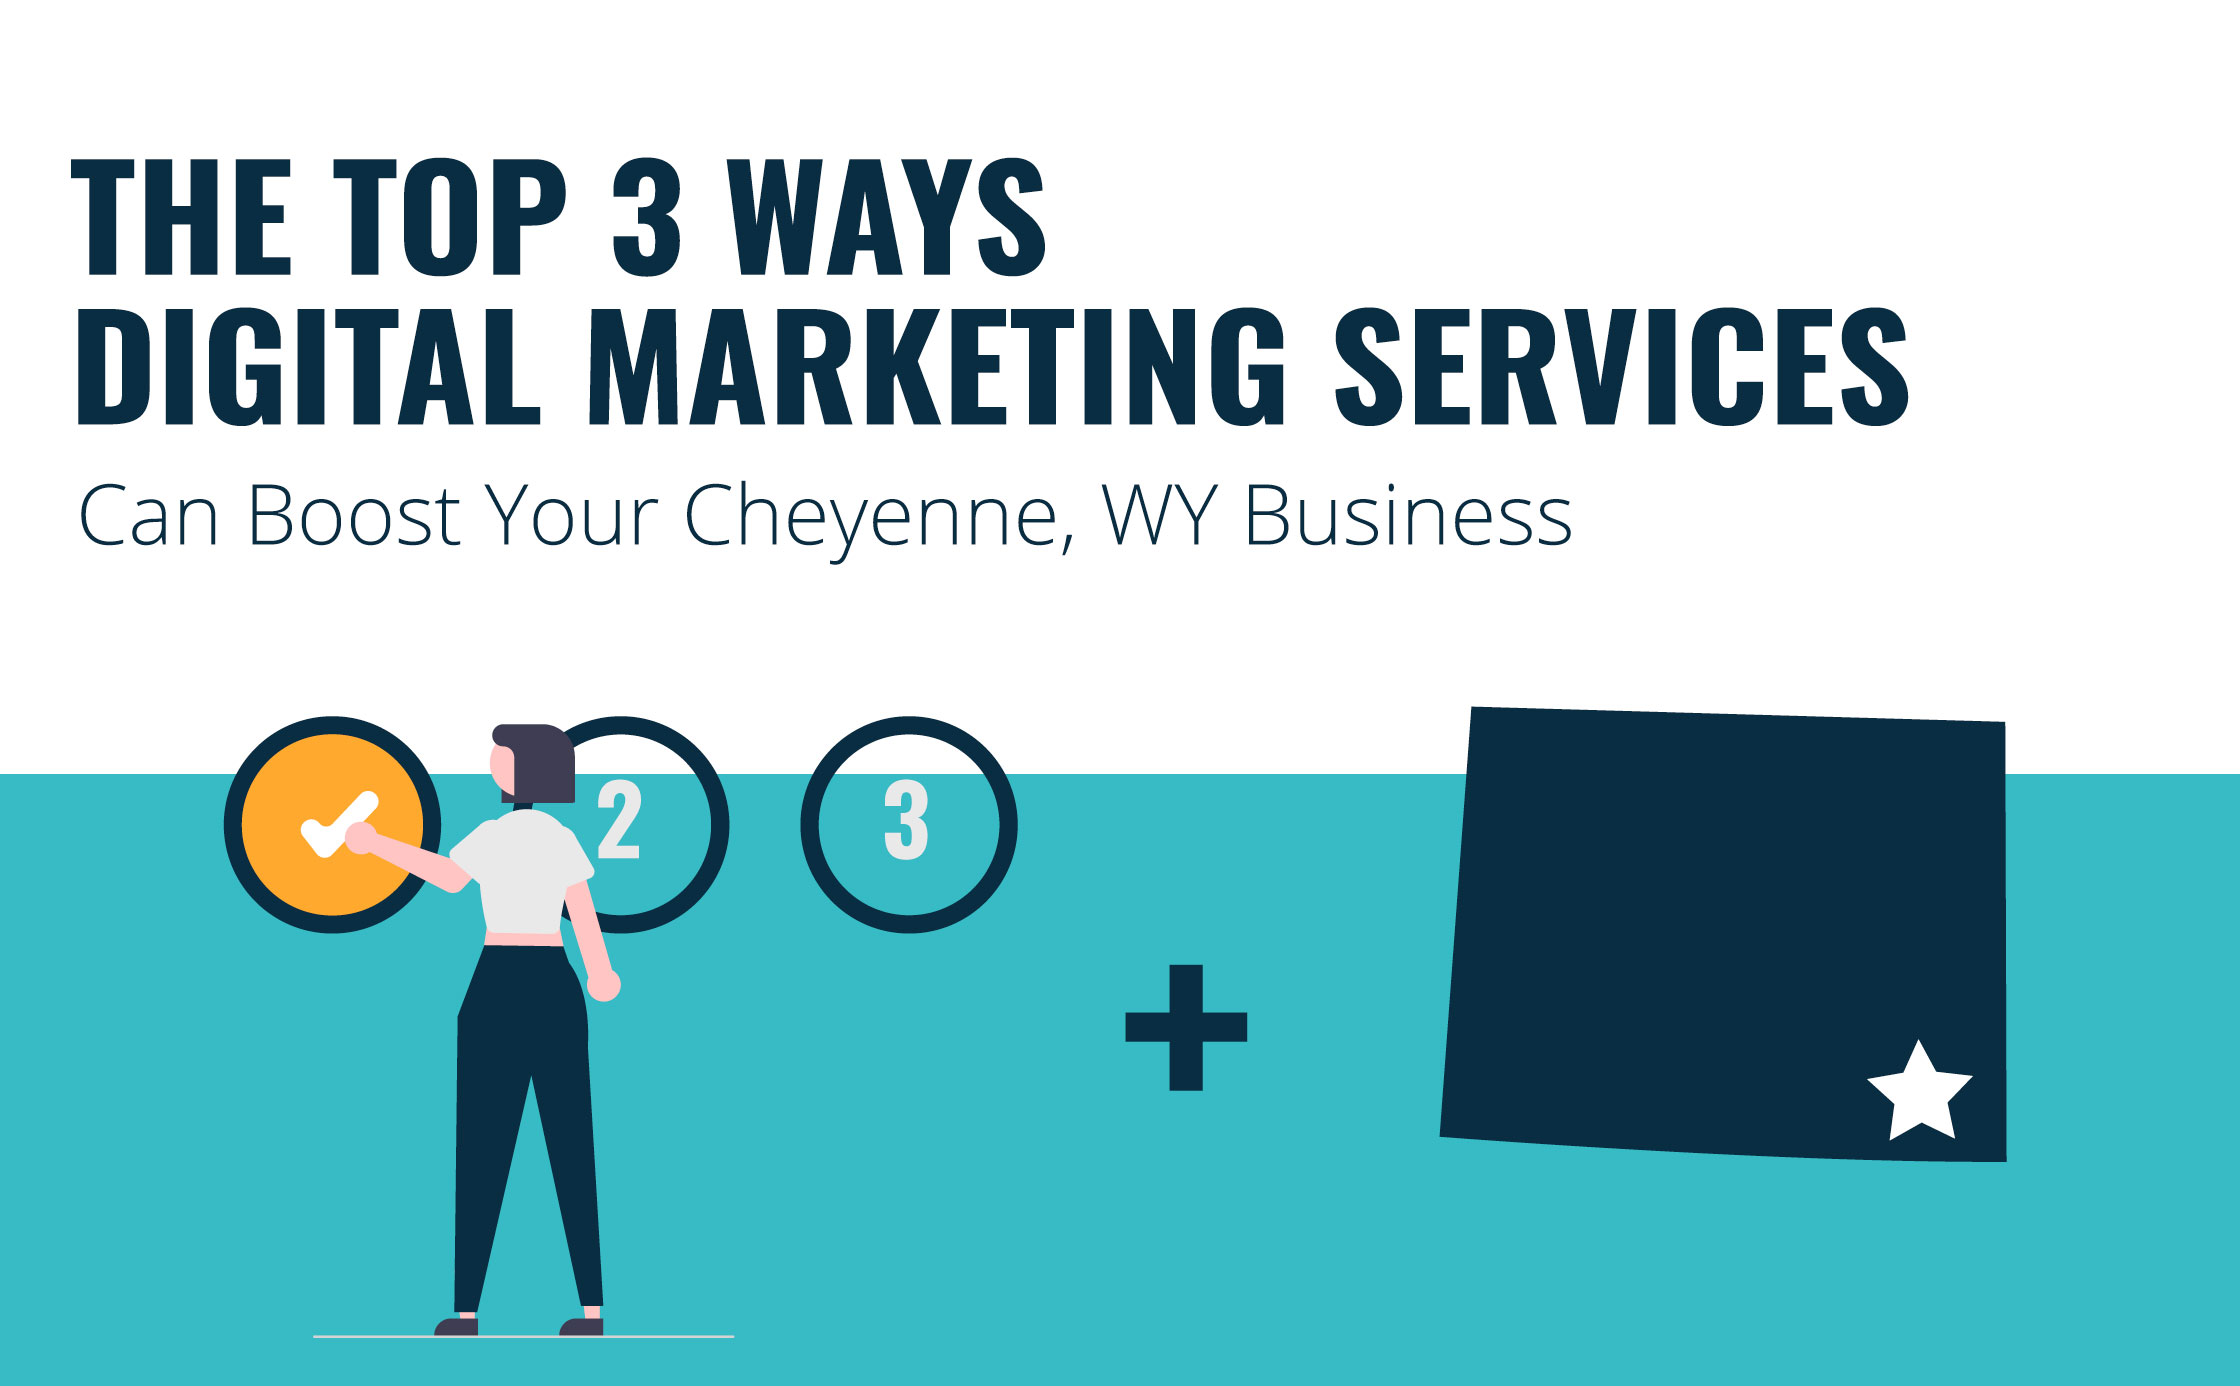 Top 3 Ways Digital Marketing Services Can Boost Your Cheyenne, WY Business